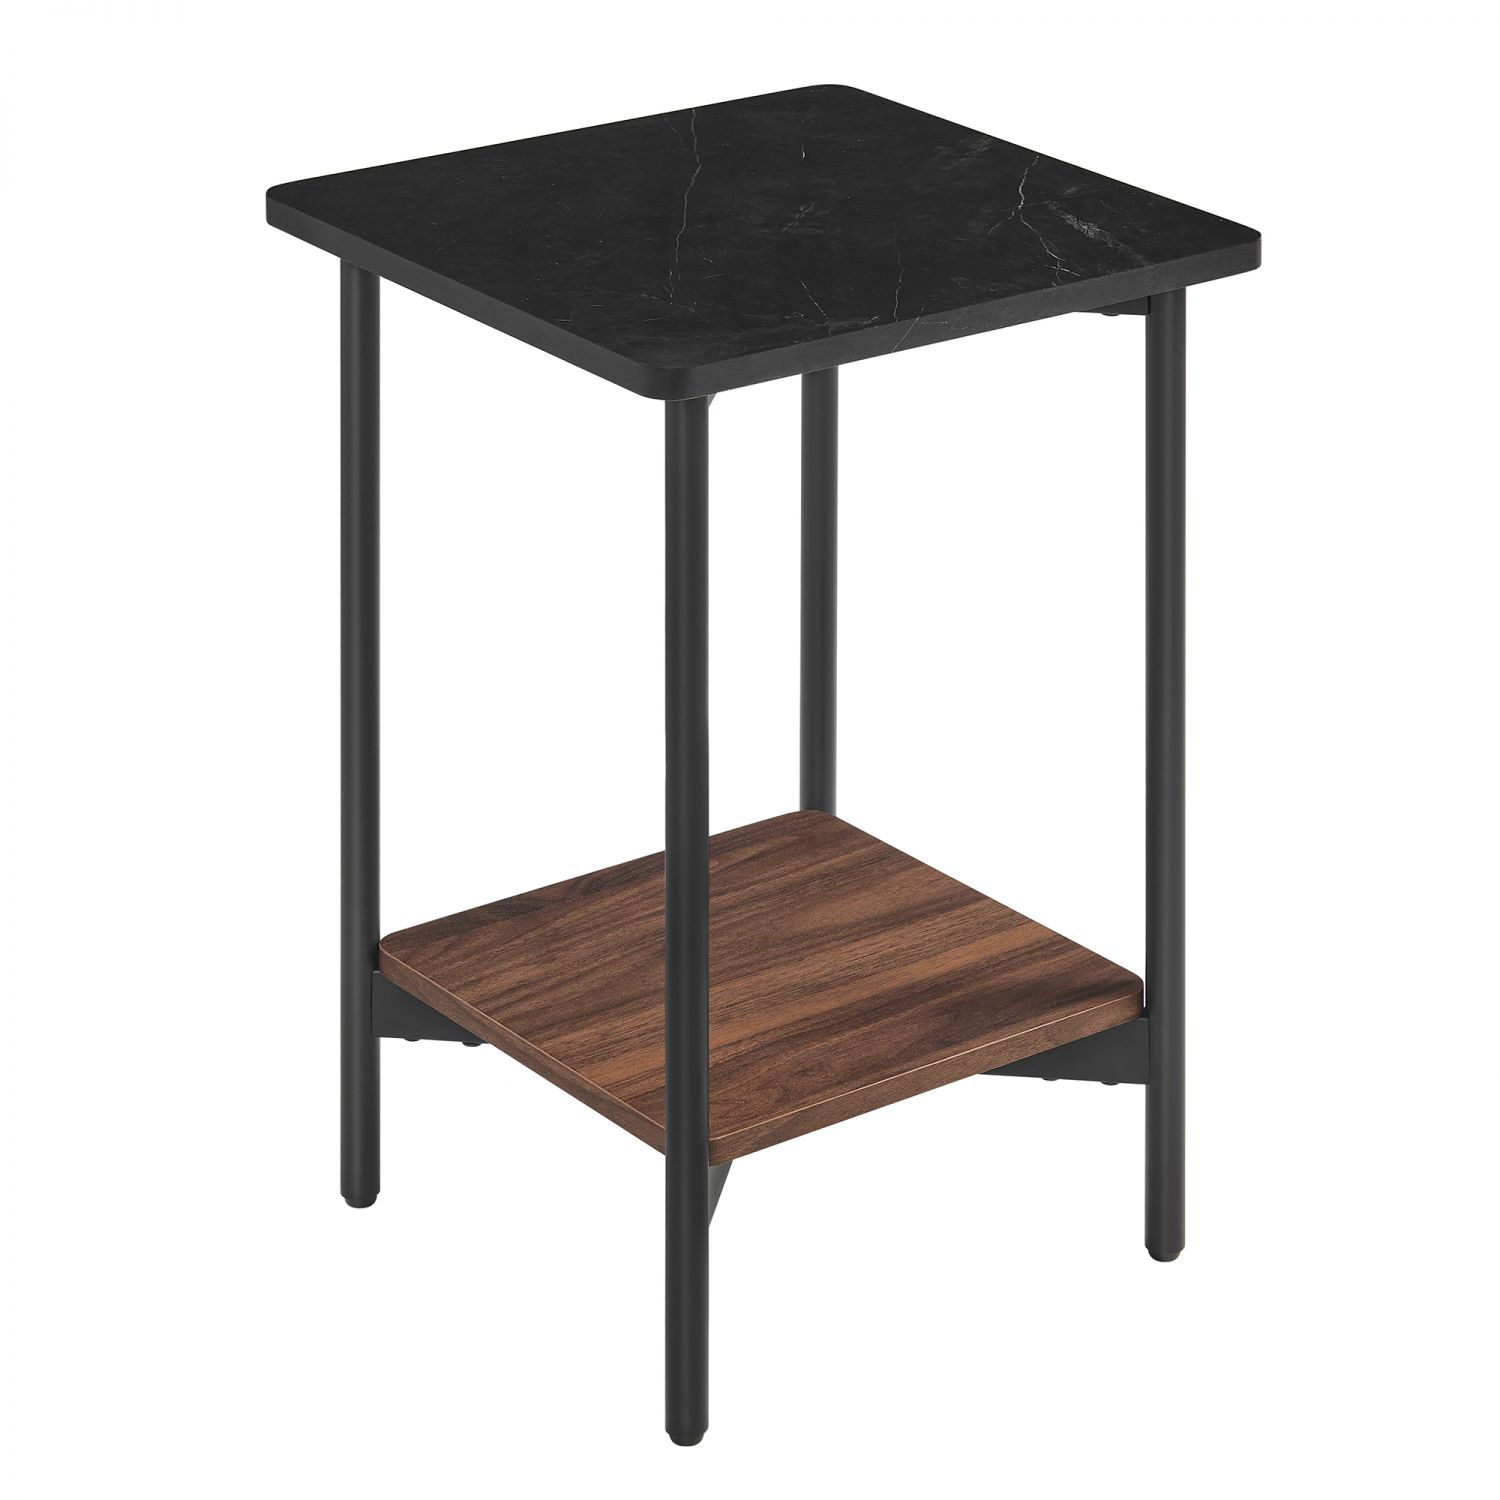  VASAGLE Side Table, Small End Table, Tall Nightstand for Living  Room, Bedroom, Office, Bathroom, Rustic Brown and Classic Black ULET273B01  : Home & Kitchen